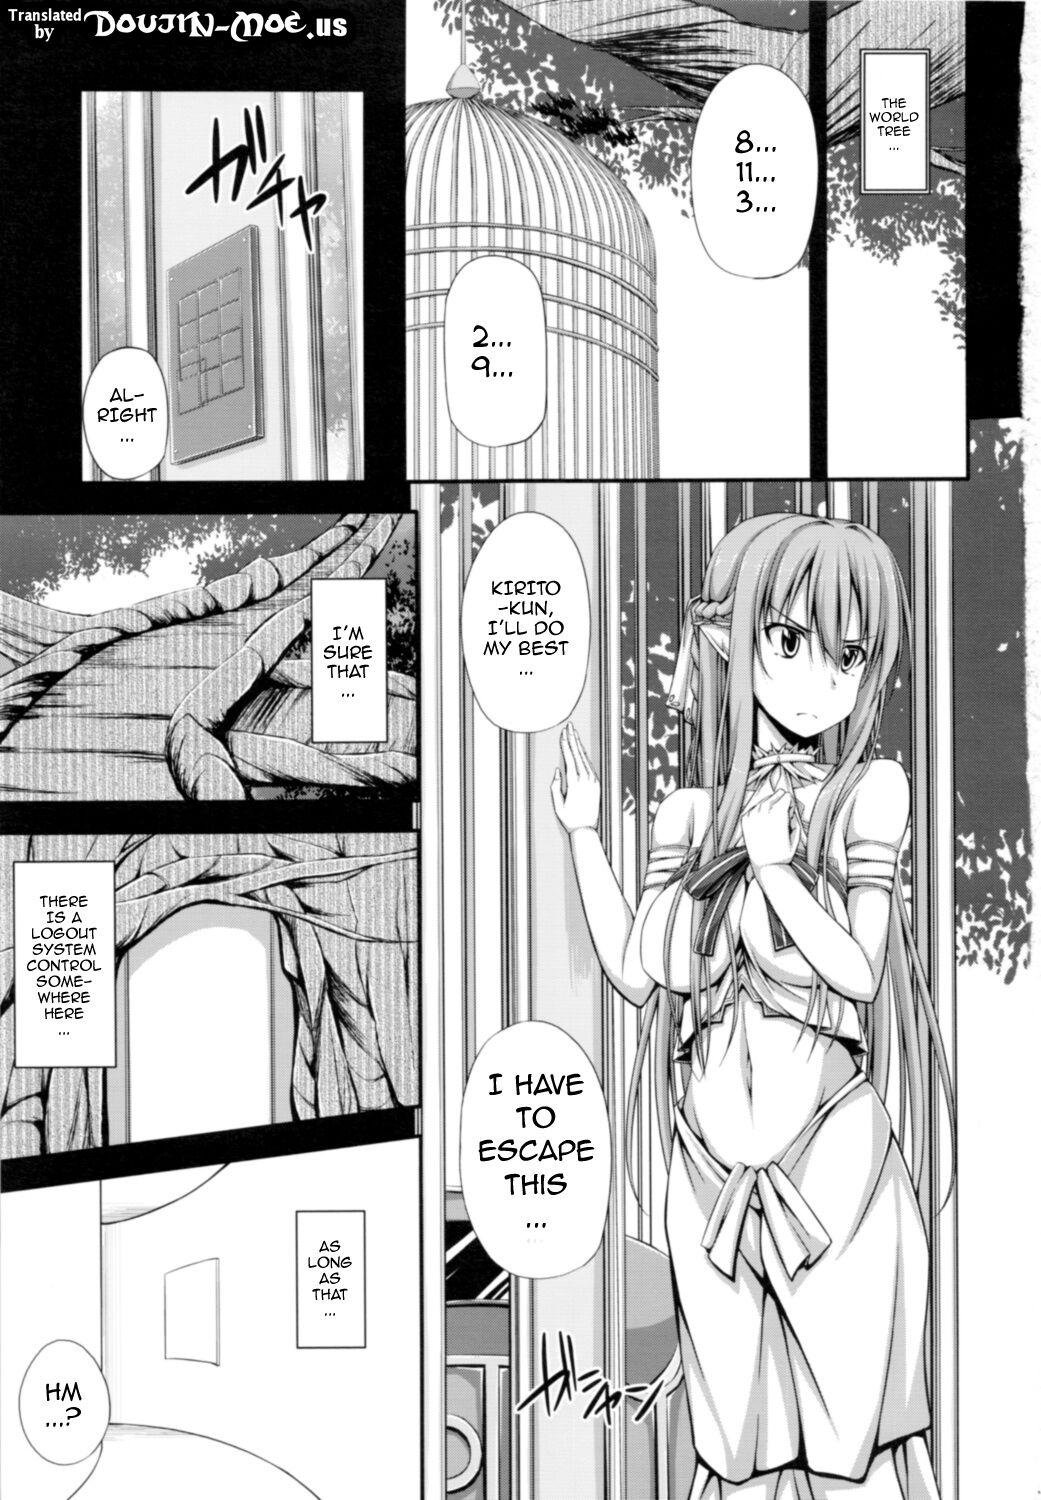 Bald Pussy SLAVE ASUNA ONLINE 2 - Sword art online Pussysex - Page 2